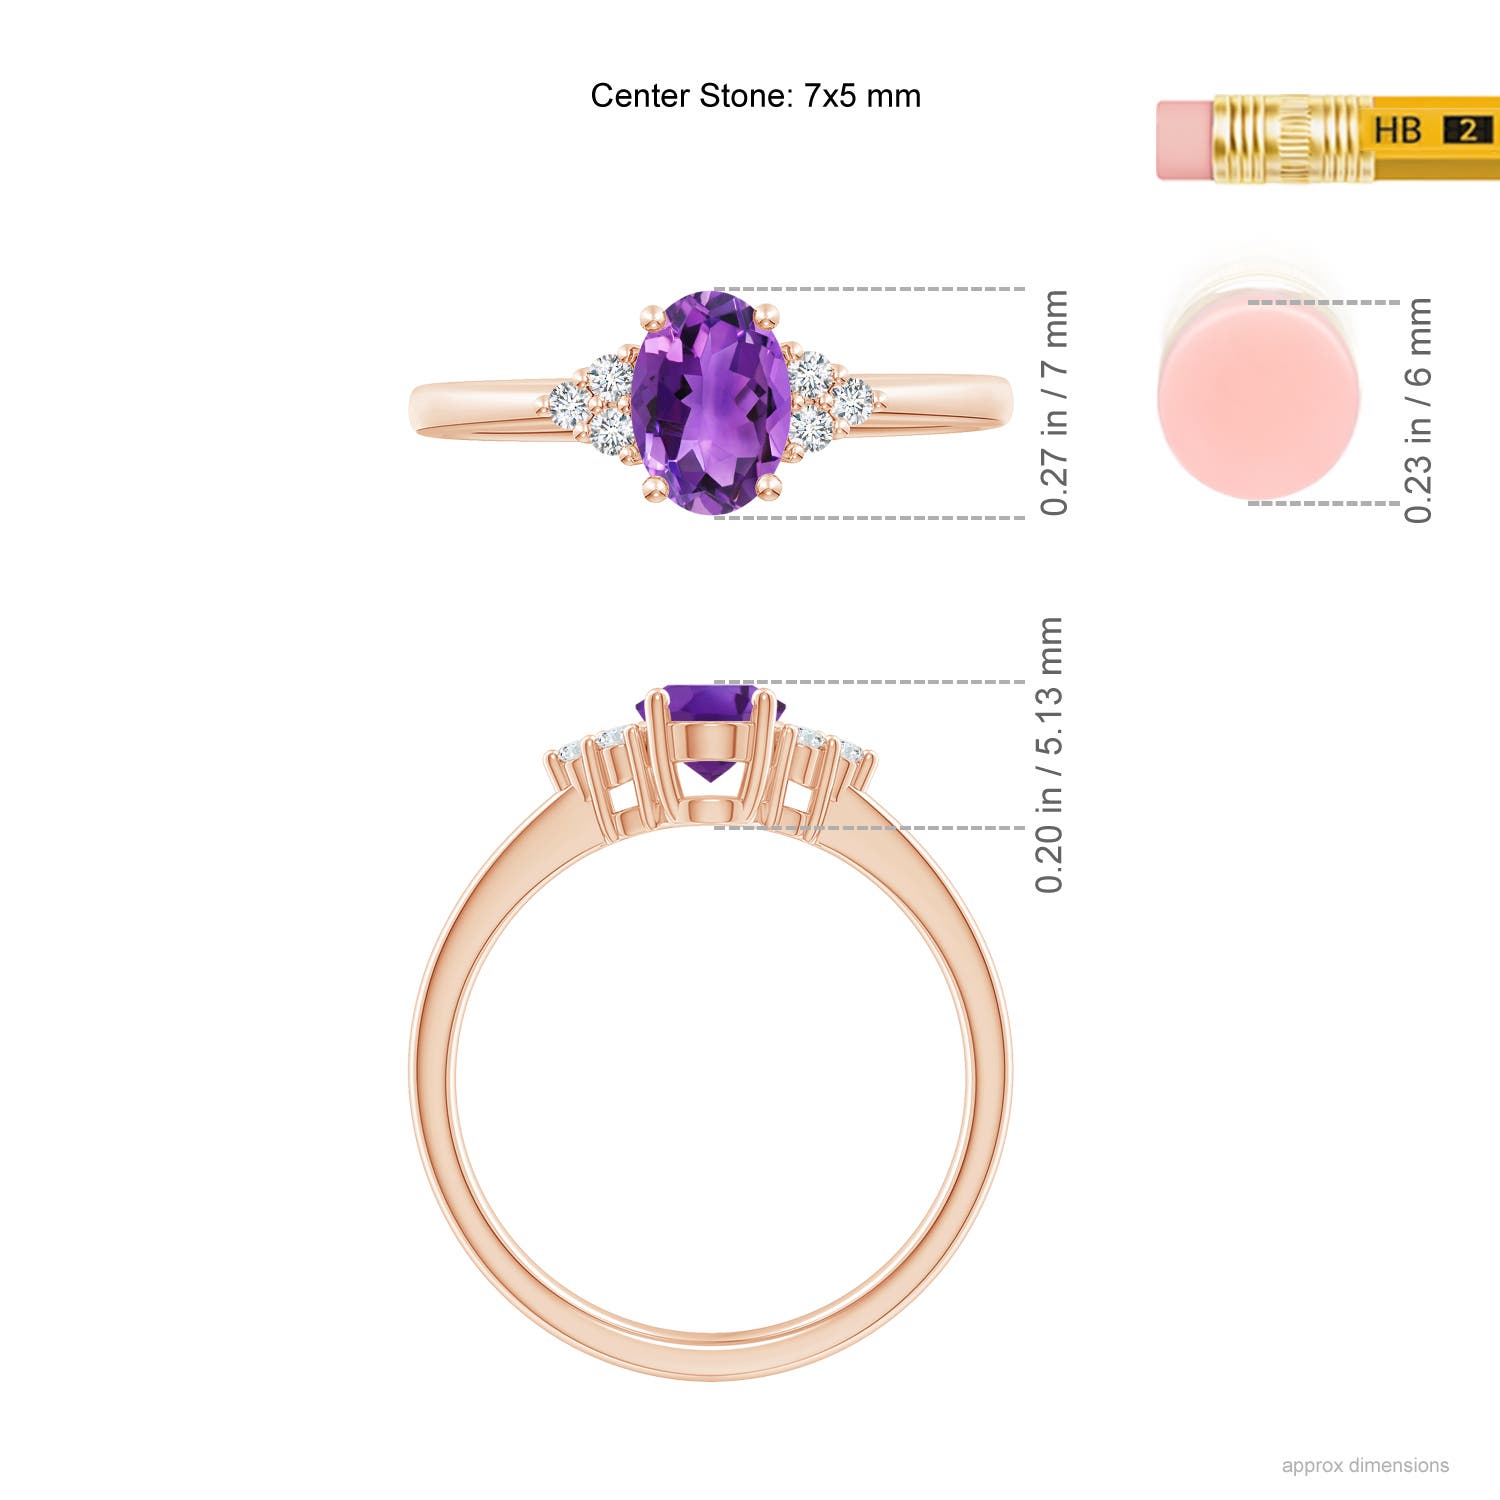 AAA - Amethyst / 0.78 CT / 14 KT Rose Gold